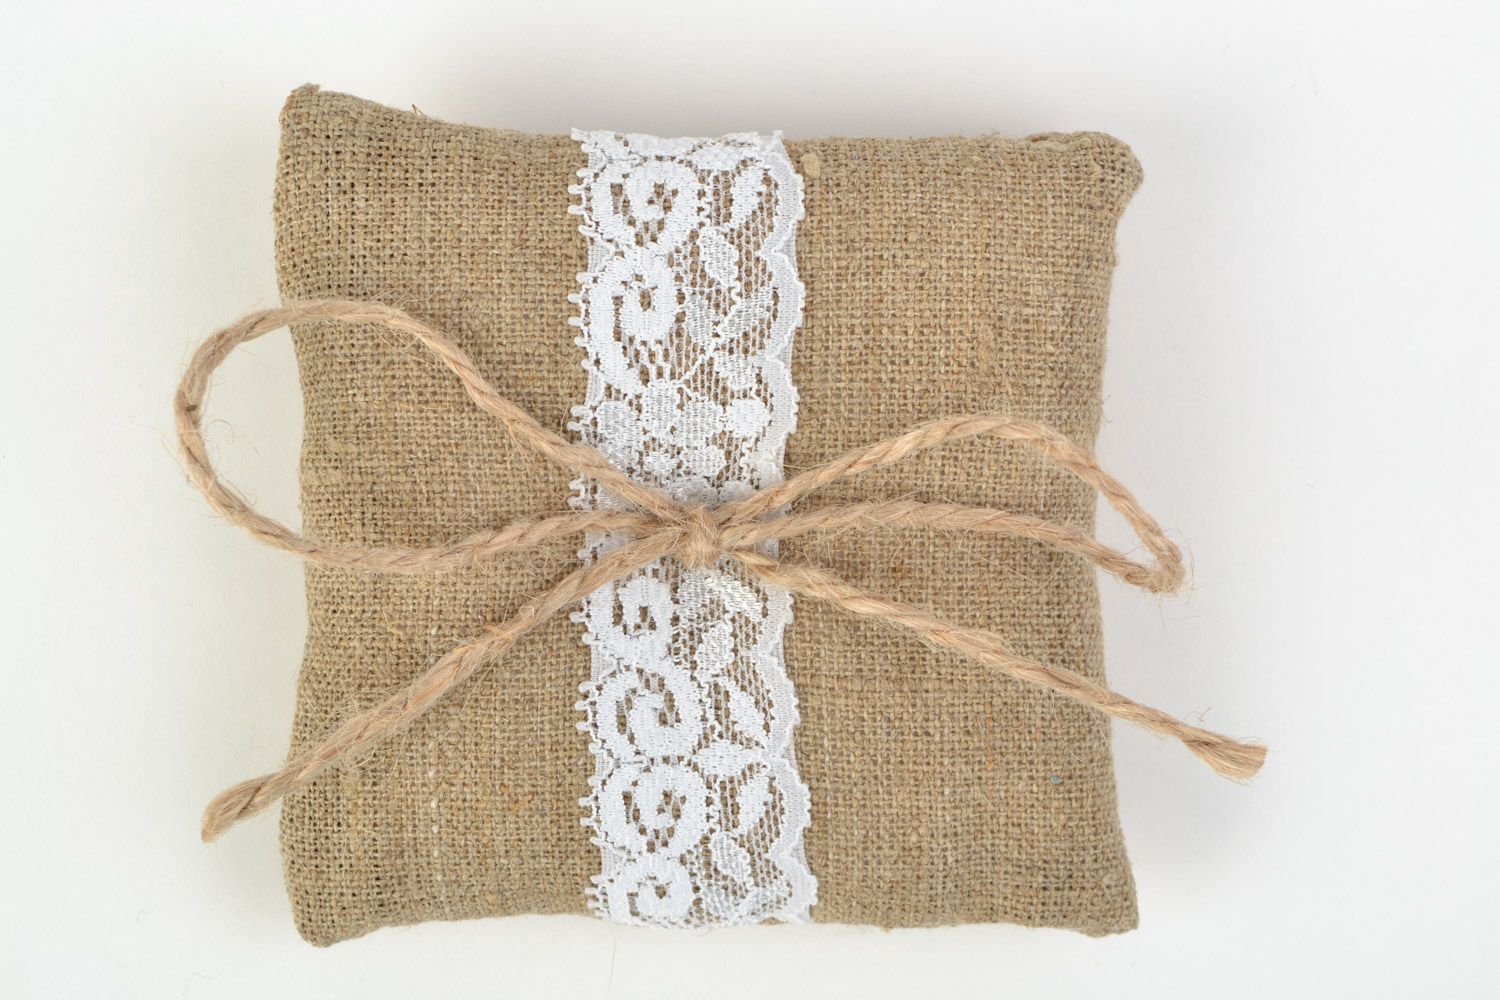 Handmade ethnic rings bearer pillow sewn of burlap with white lace and cord  photo 4